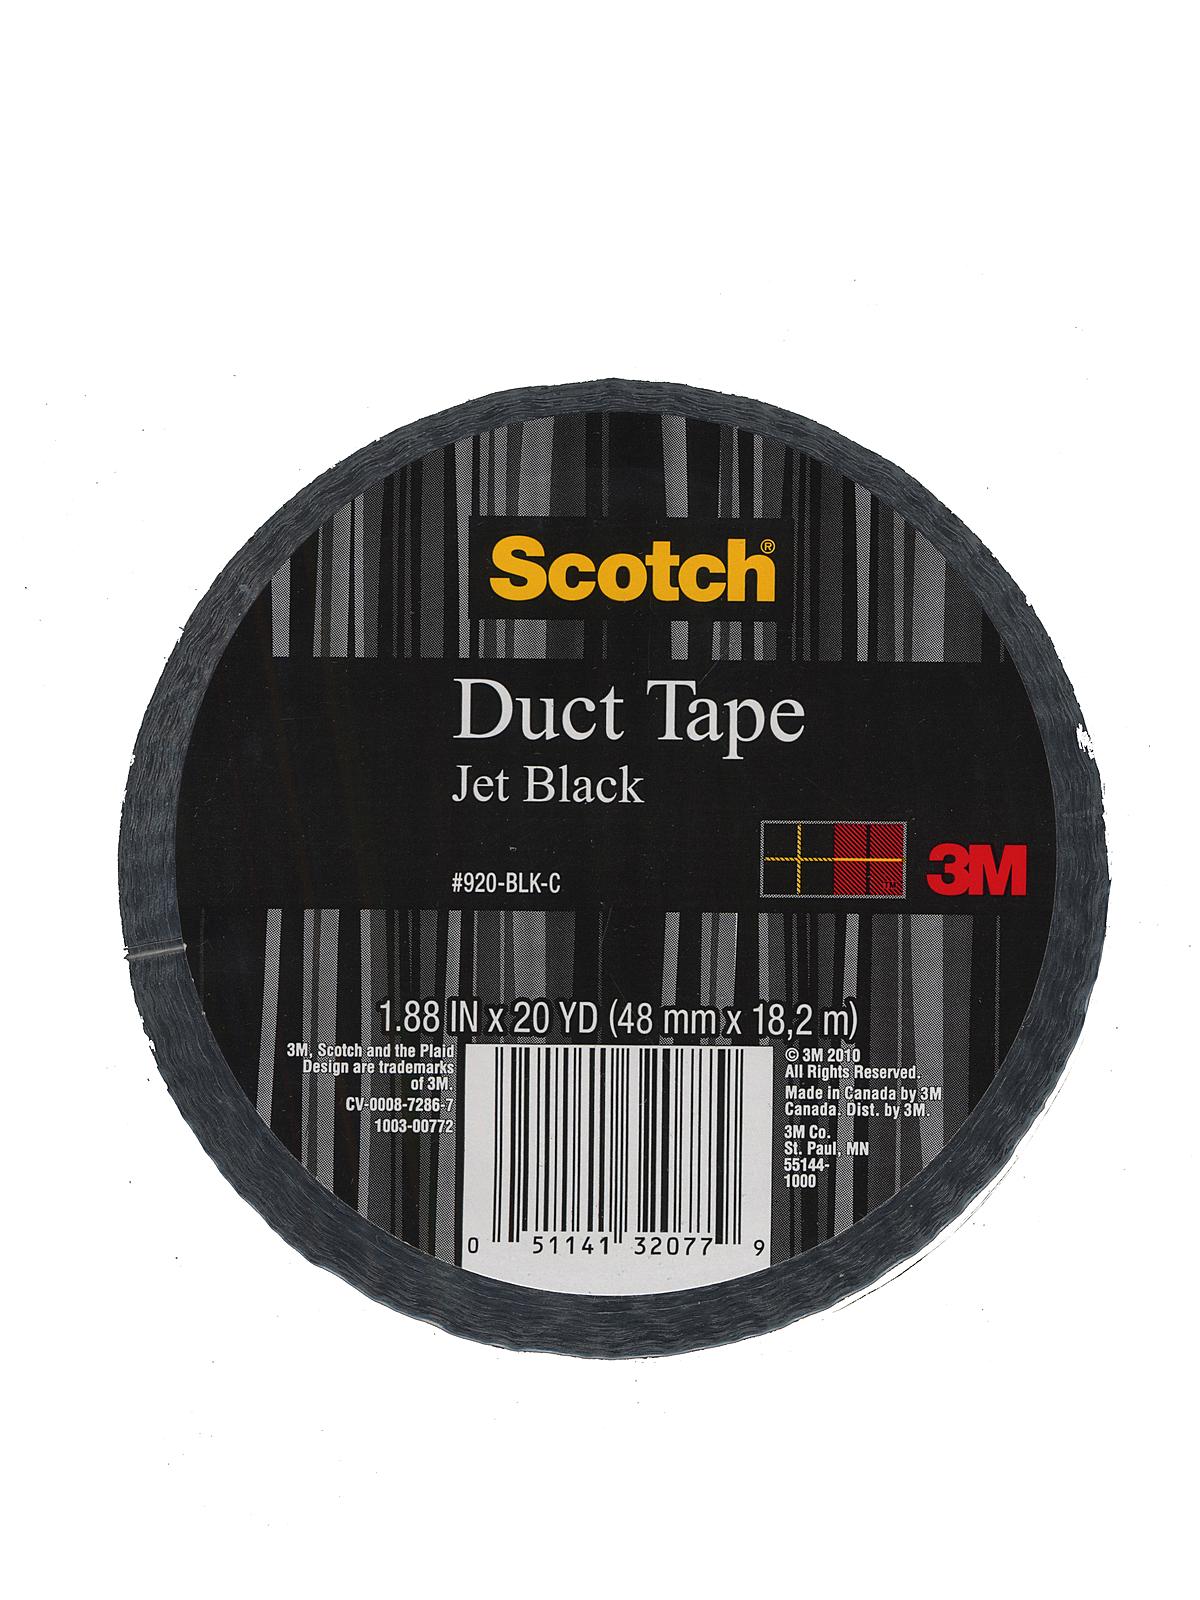 Colored Duct Tape Black 1.88 In. X 20 Yd. Roll 920-BLK-C